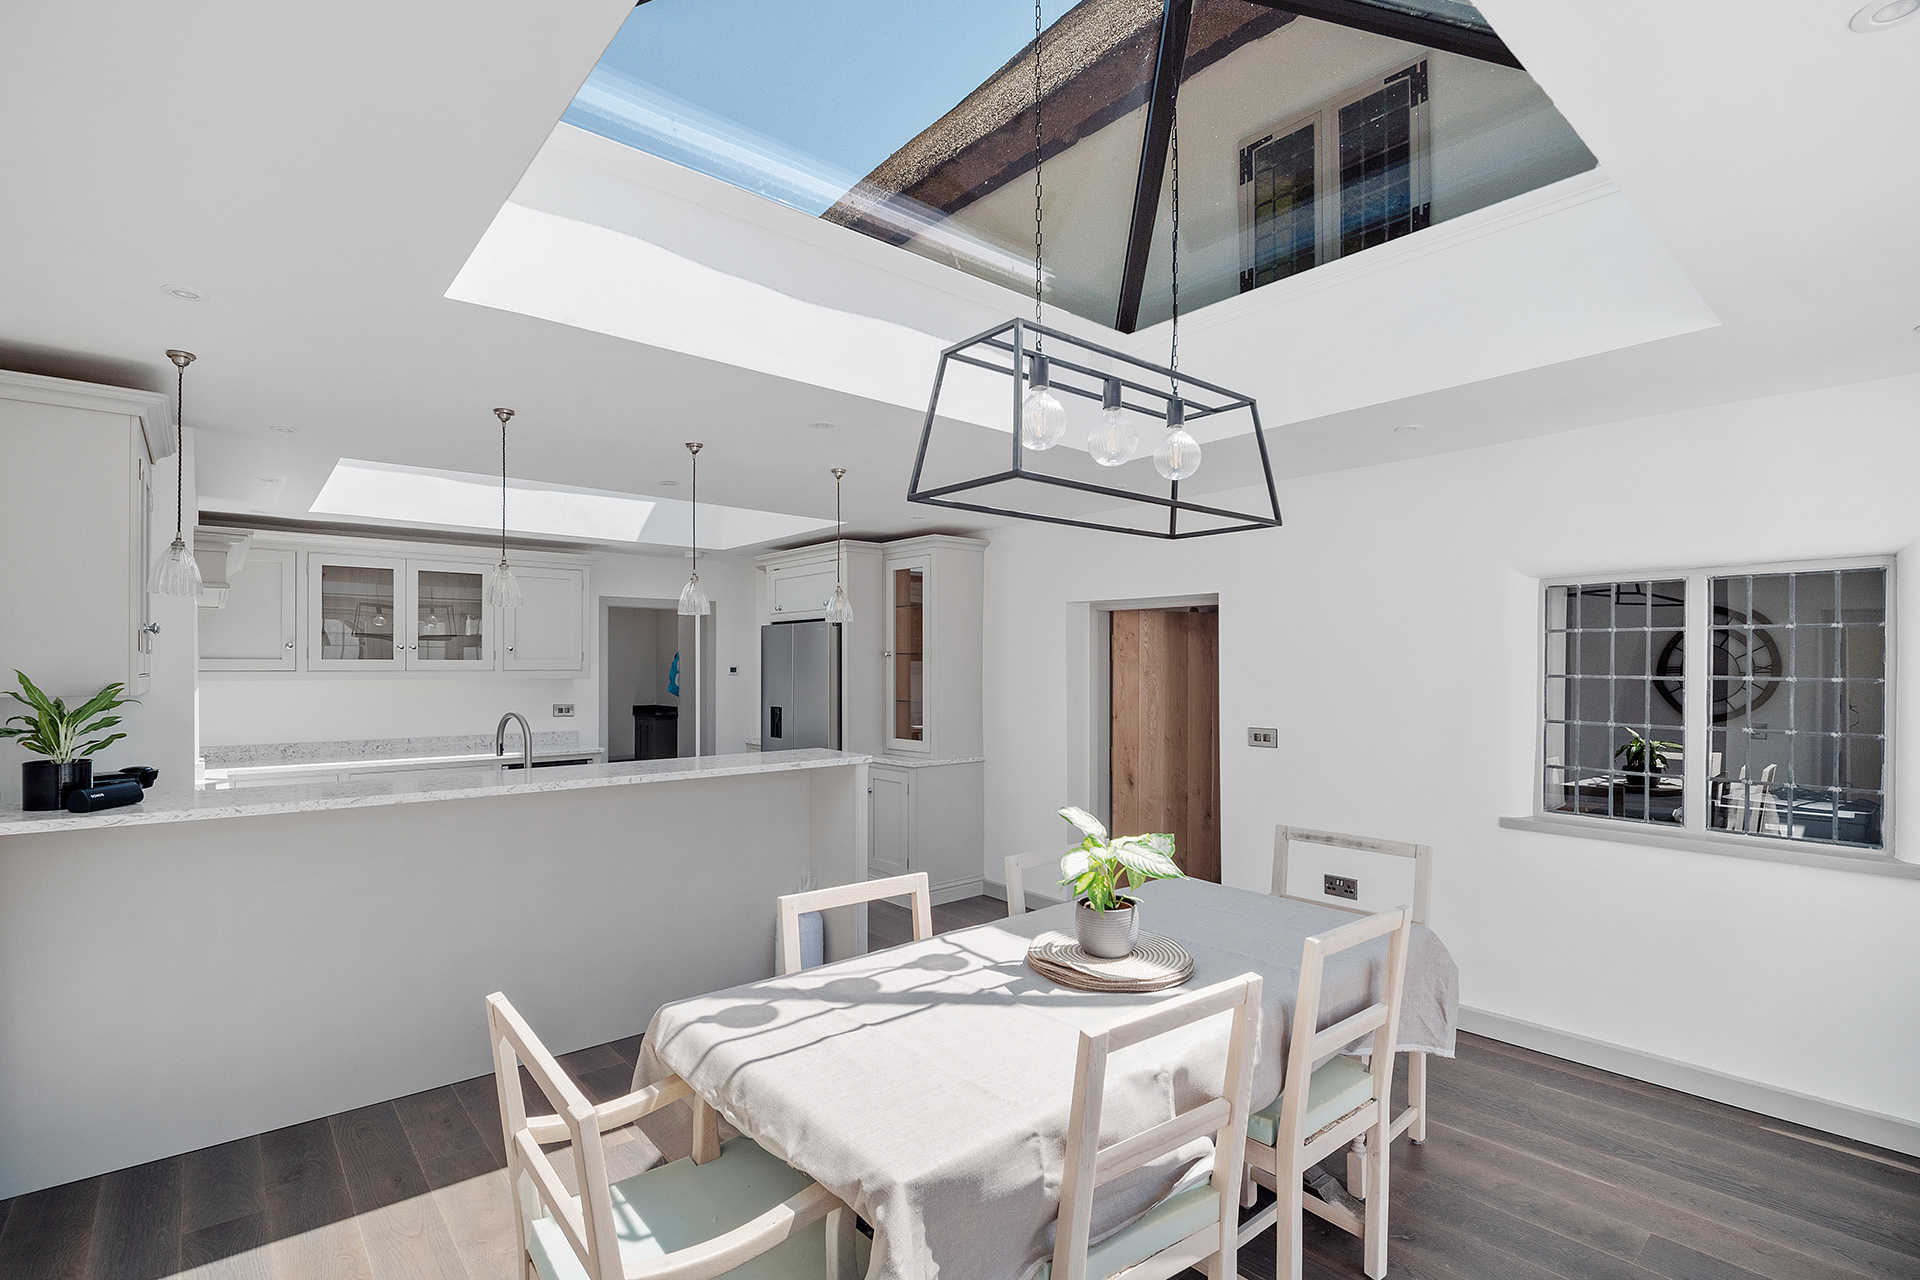 modern large kitchen extension area in white tones with large roof window